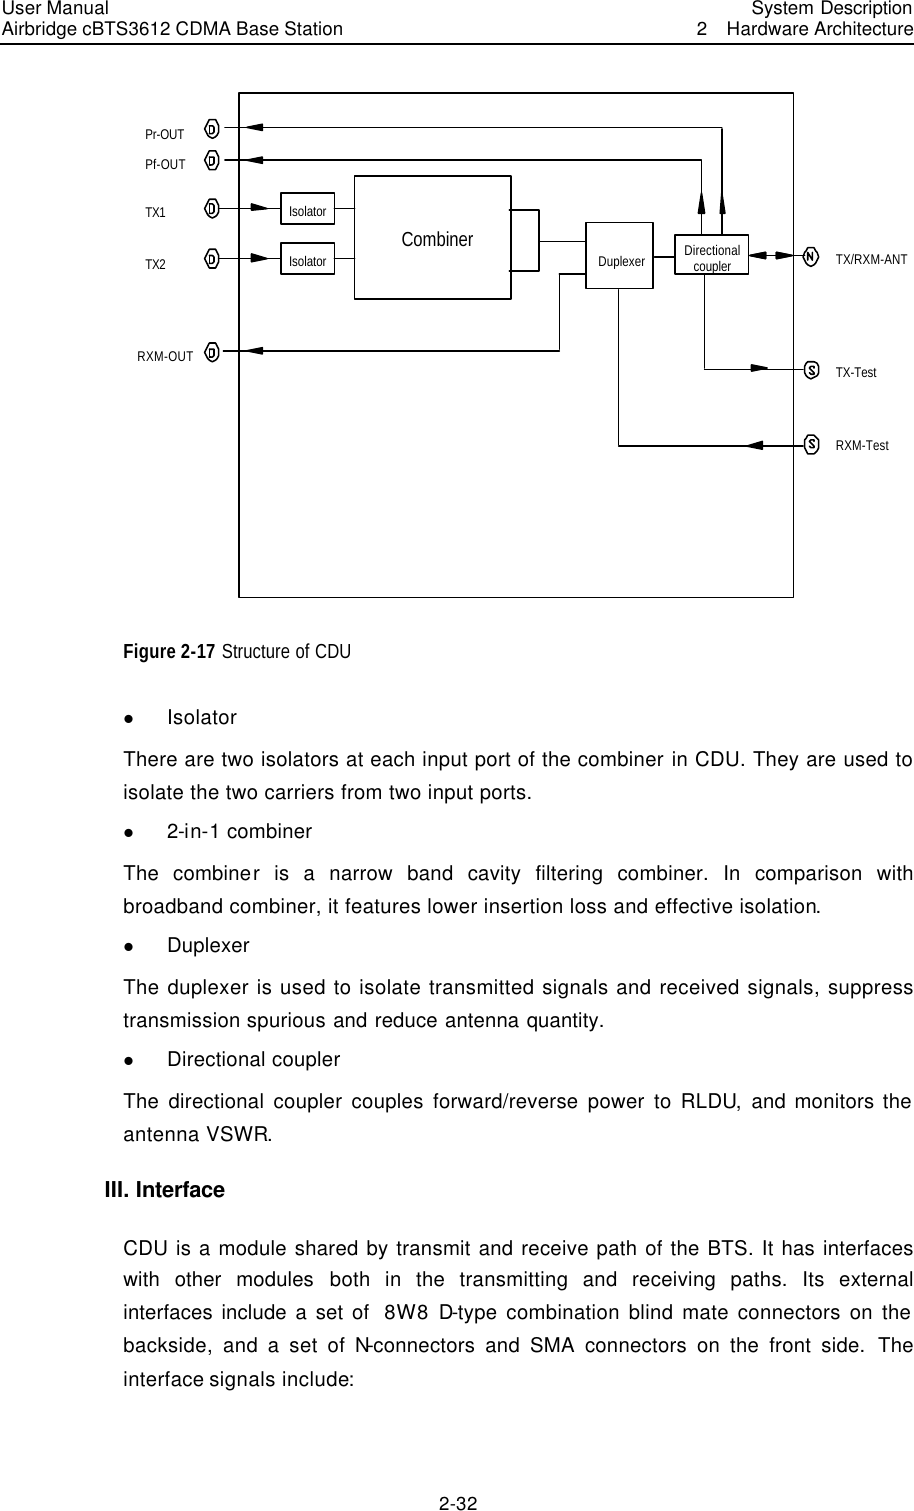 User Manual Airbridge cBTS3612 CDMA Base Station   System Description2  Hardware Architecture 2-32 Pr-OUTPf-OUTTX1TX2RXM-OUTCombinerDuplexer Directional couplerRXM-TestTX-TestTX/RXM-ANTIsolatorIsolator Figure 2-17 Structure of CDU l Isolator There are two isolators at each input port of the combiner in CDU. They are used to isolate the two carriers from two input ports.   l 2-in-1 combiner The combiner is a narrow band cavity filtering combiner. In comparison with broadband combiner, it features lower insertion loss and effective isolation.   l Duplexer The duplexer is used to isolate transmitted signals and received signals, suppress transmission spurious and reduce antenna quantity. l Directional coupler The directional coupler couples forward/reverse power to RLDU,  and monitors the antenna VSWR.   III. Interface CDU is a module shared by transmit and receive path of the BTS. It has interfaces with other modules both in the transmitting and receiving paths. Its external interfaces include a set of  8W8 D-type combination blind mate connectors on the backside, and a set of N-connectors and SMA connectors on the front side. The interface signals include:   